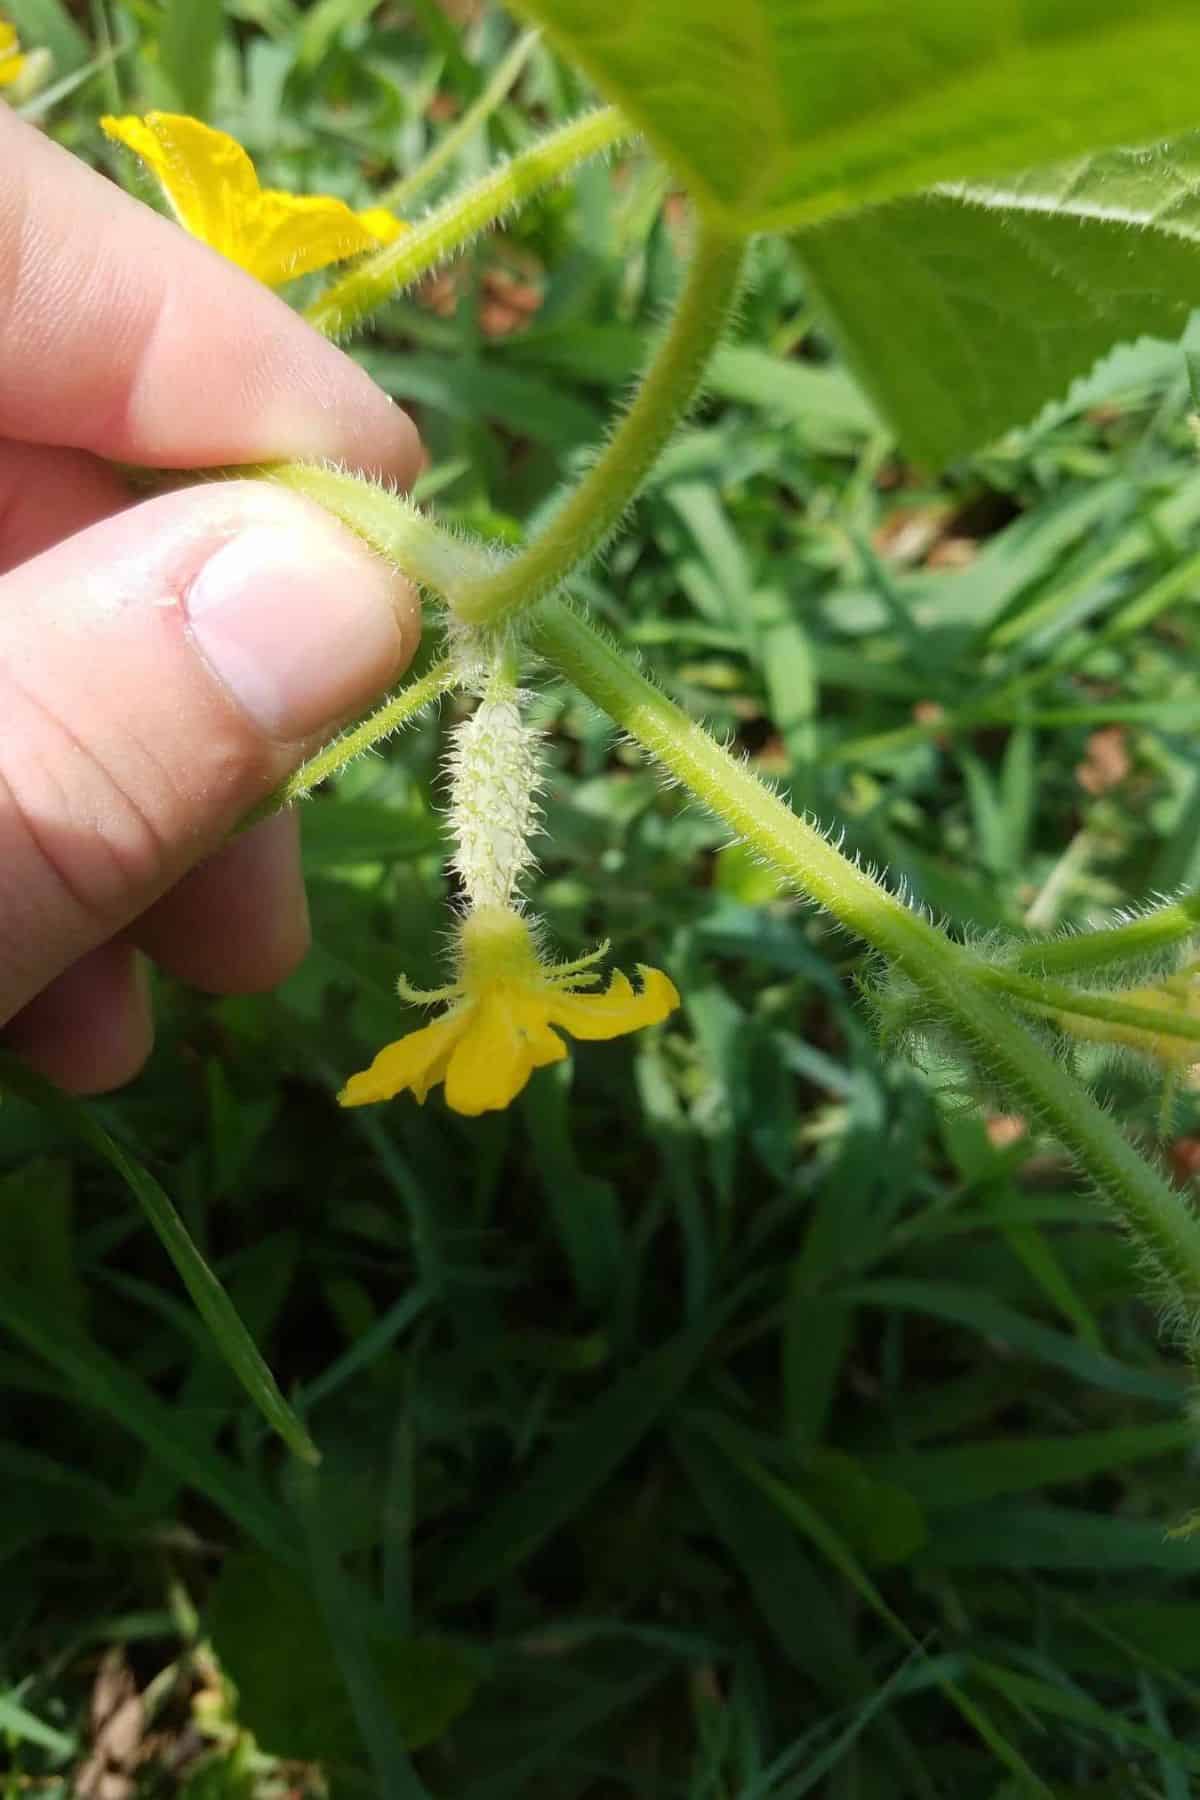 Cucumber growing on the plant with flower bloom on the end.